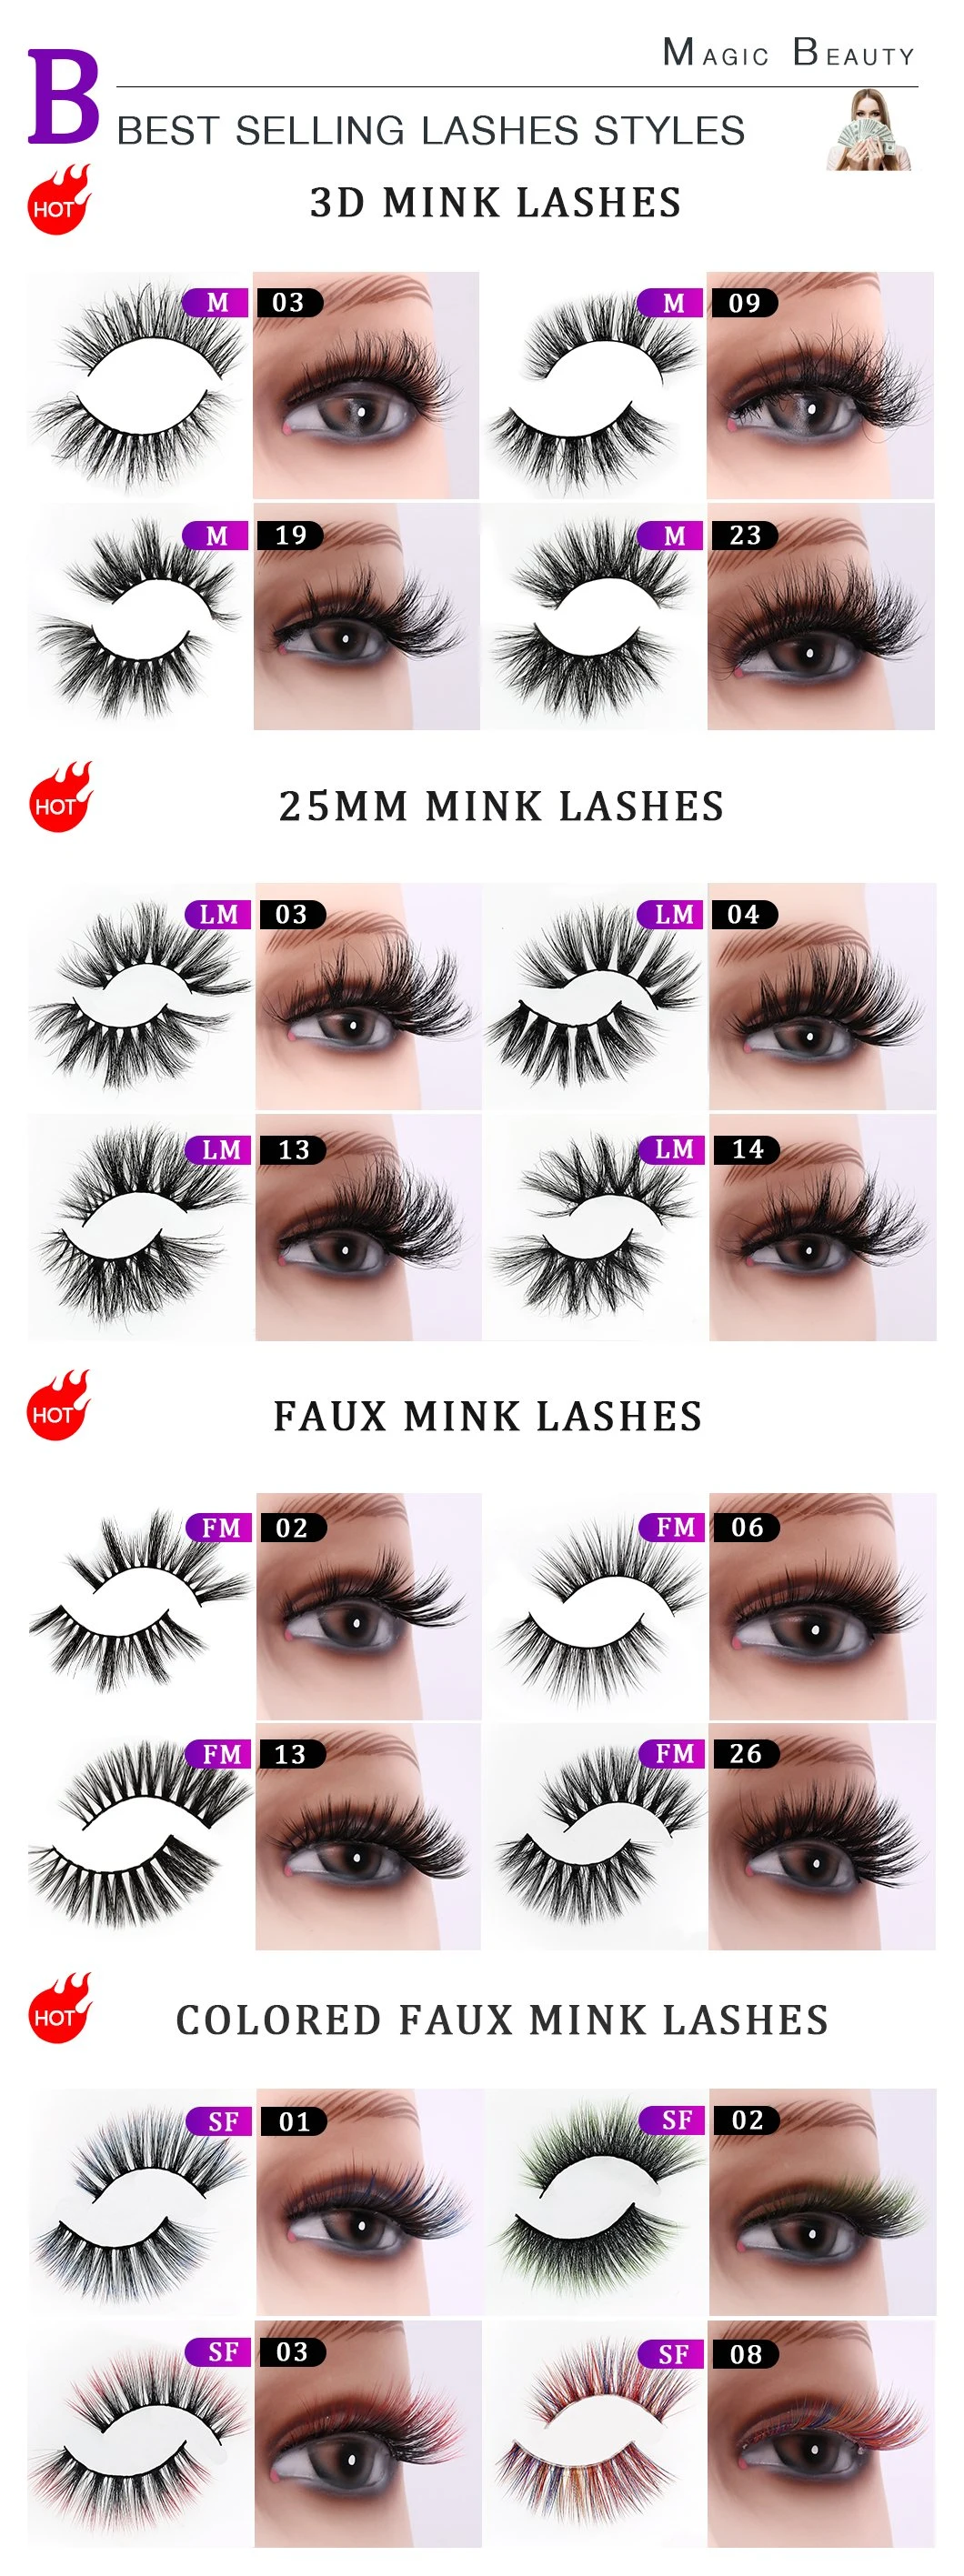 High Quality Human Hair Eyelashes Makeup False Lashes with Your Own Brand